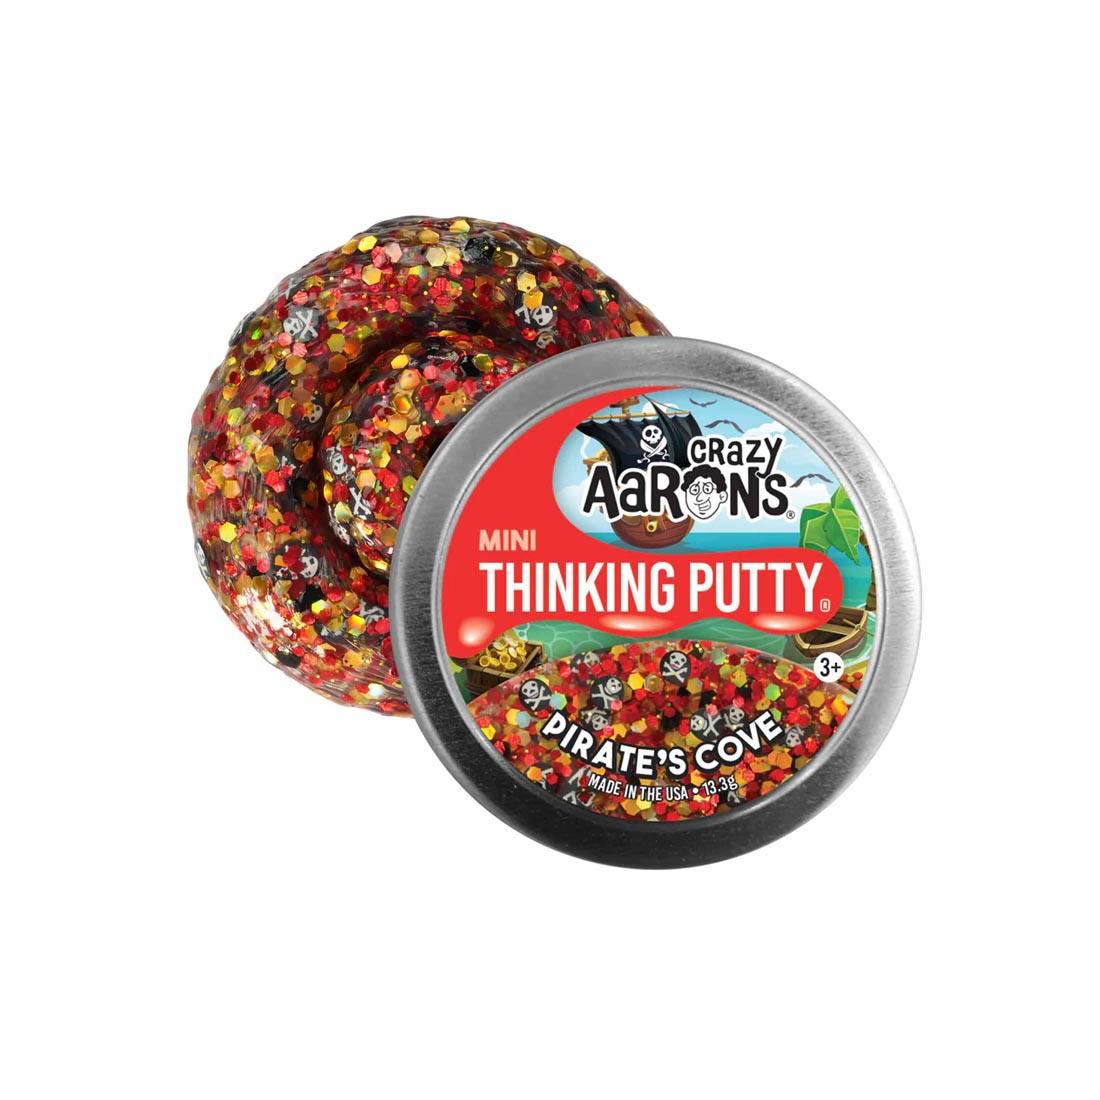 Pirate's Cove Mini Thinking Putty by Crazy Aaron